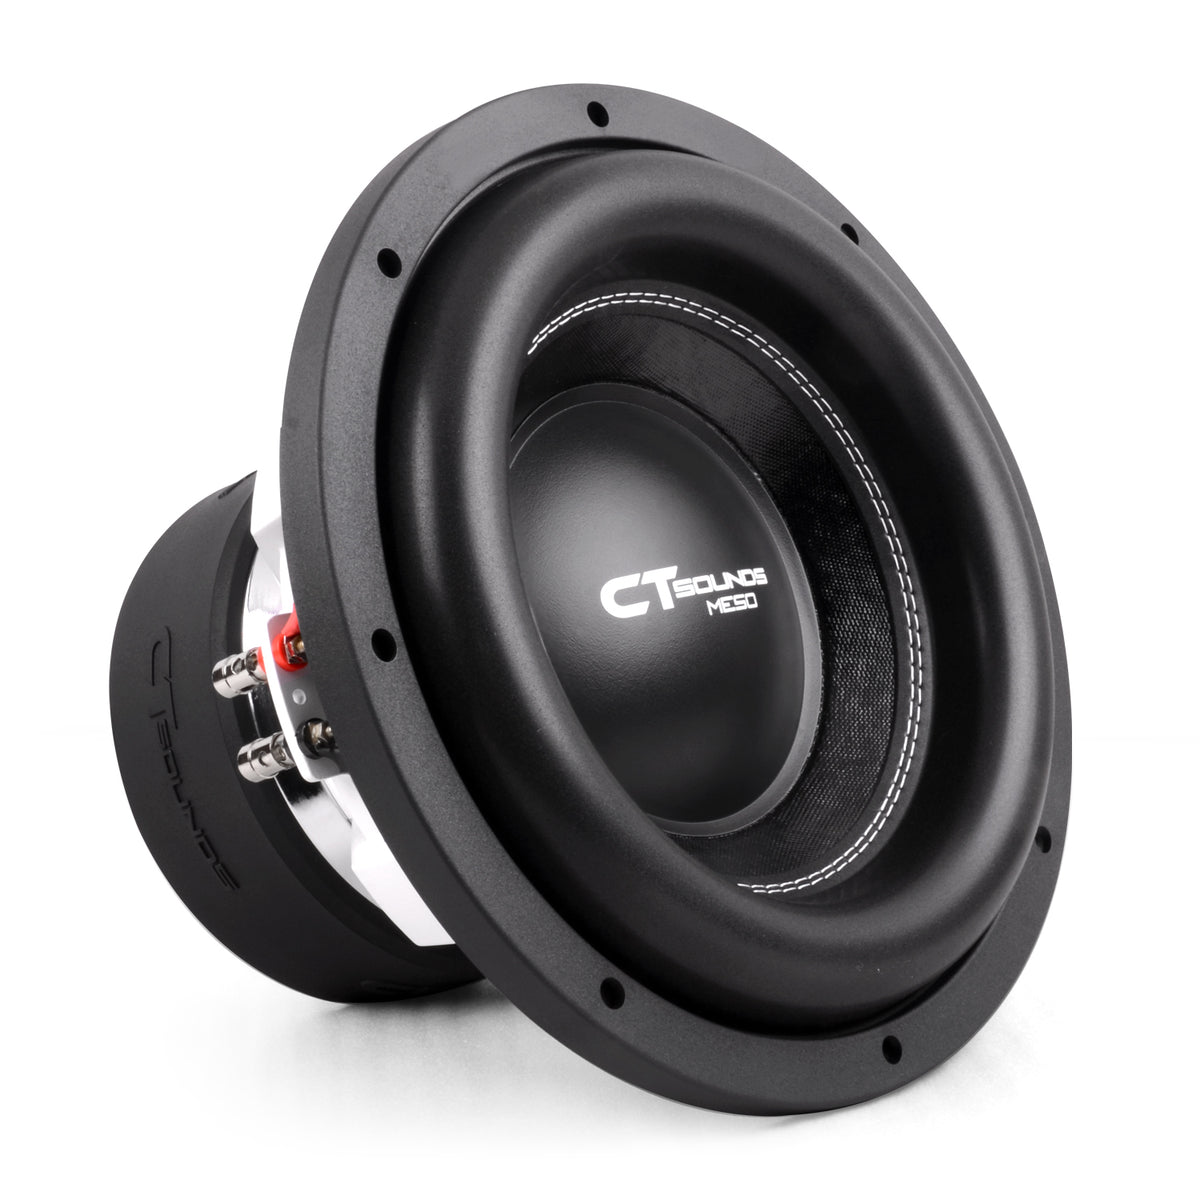 MESO12D2 // 1500 Watts RMS 12 Inch Car Subwoofer CT SOUNDS